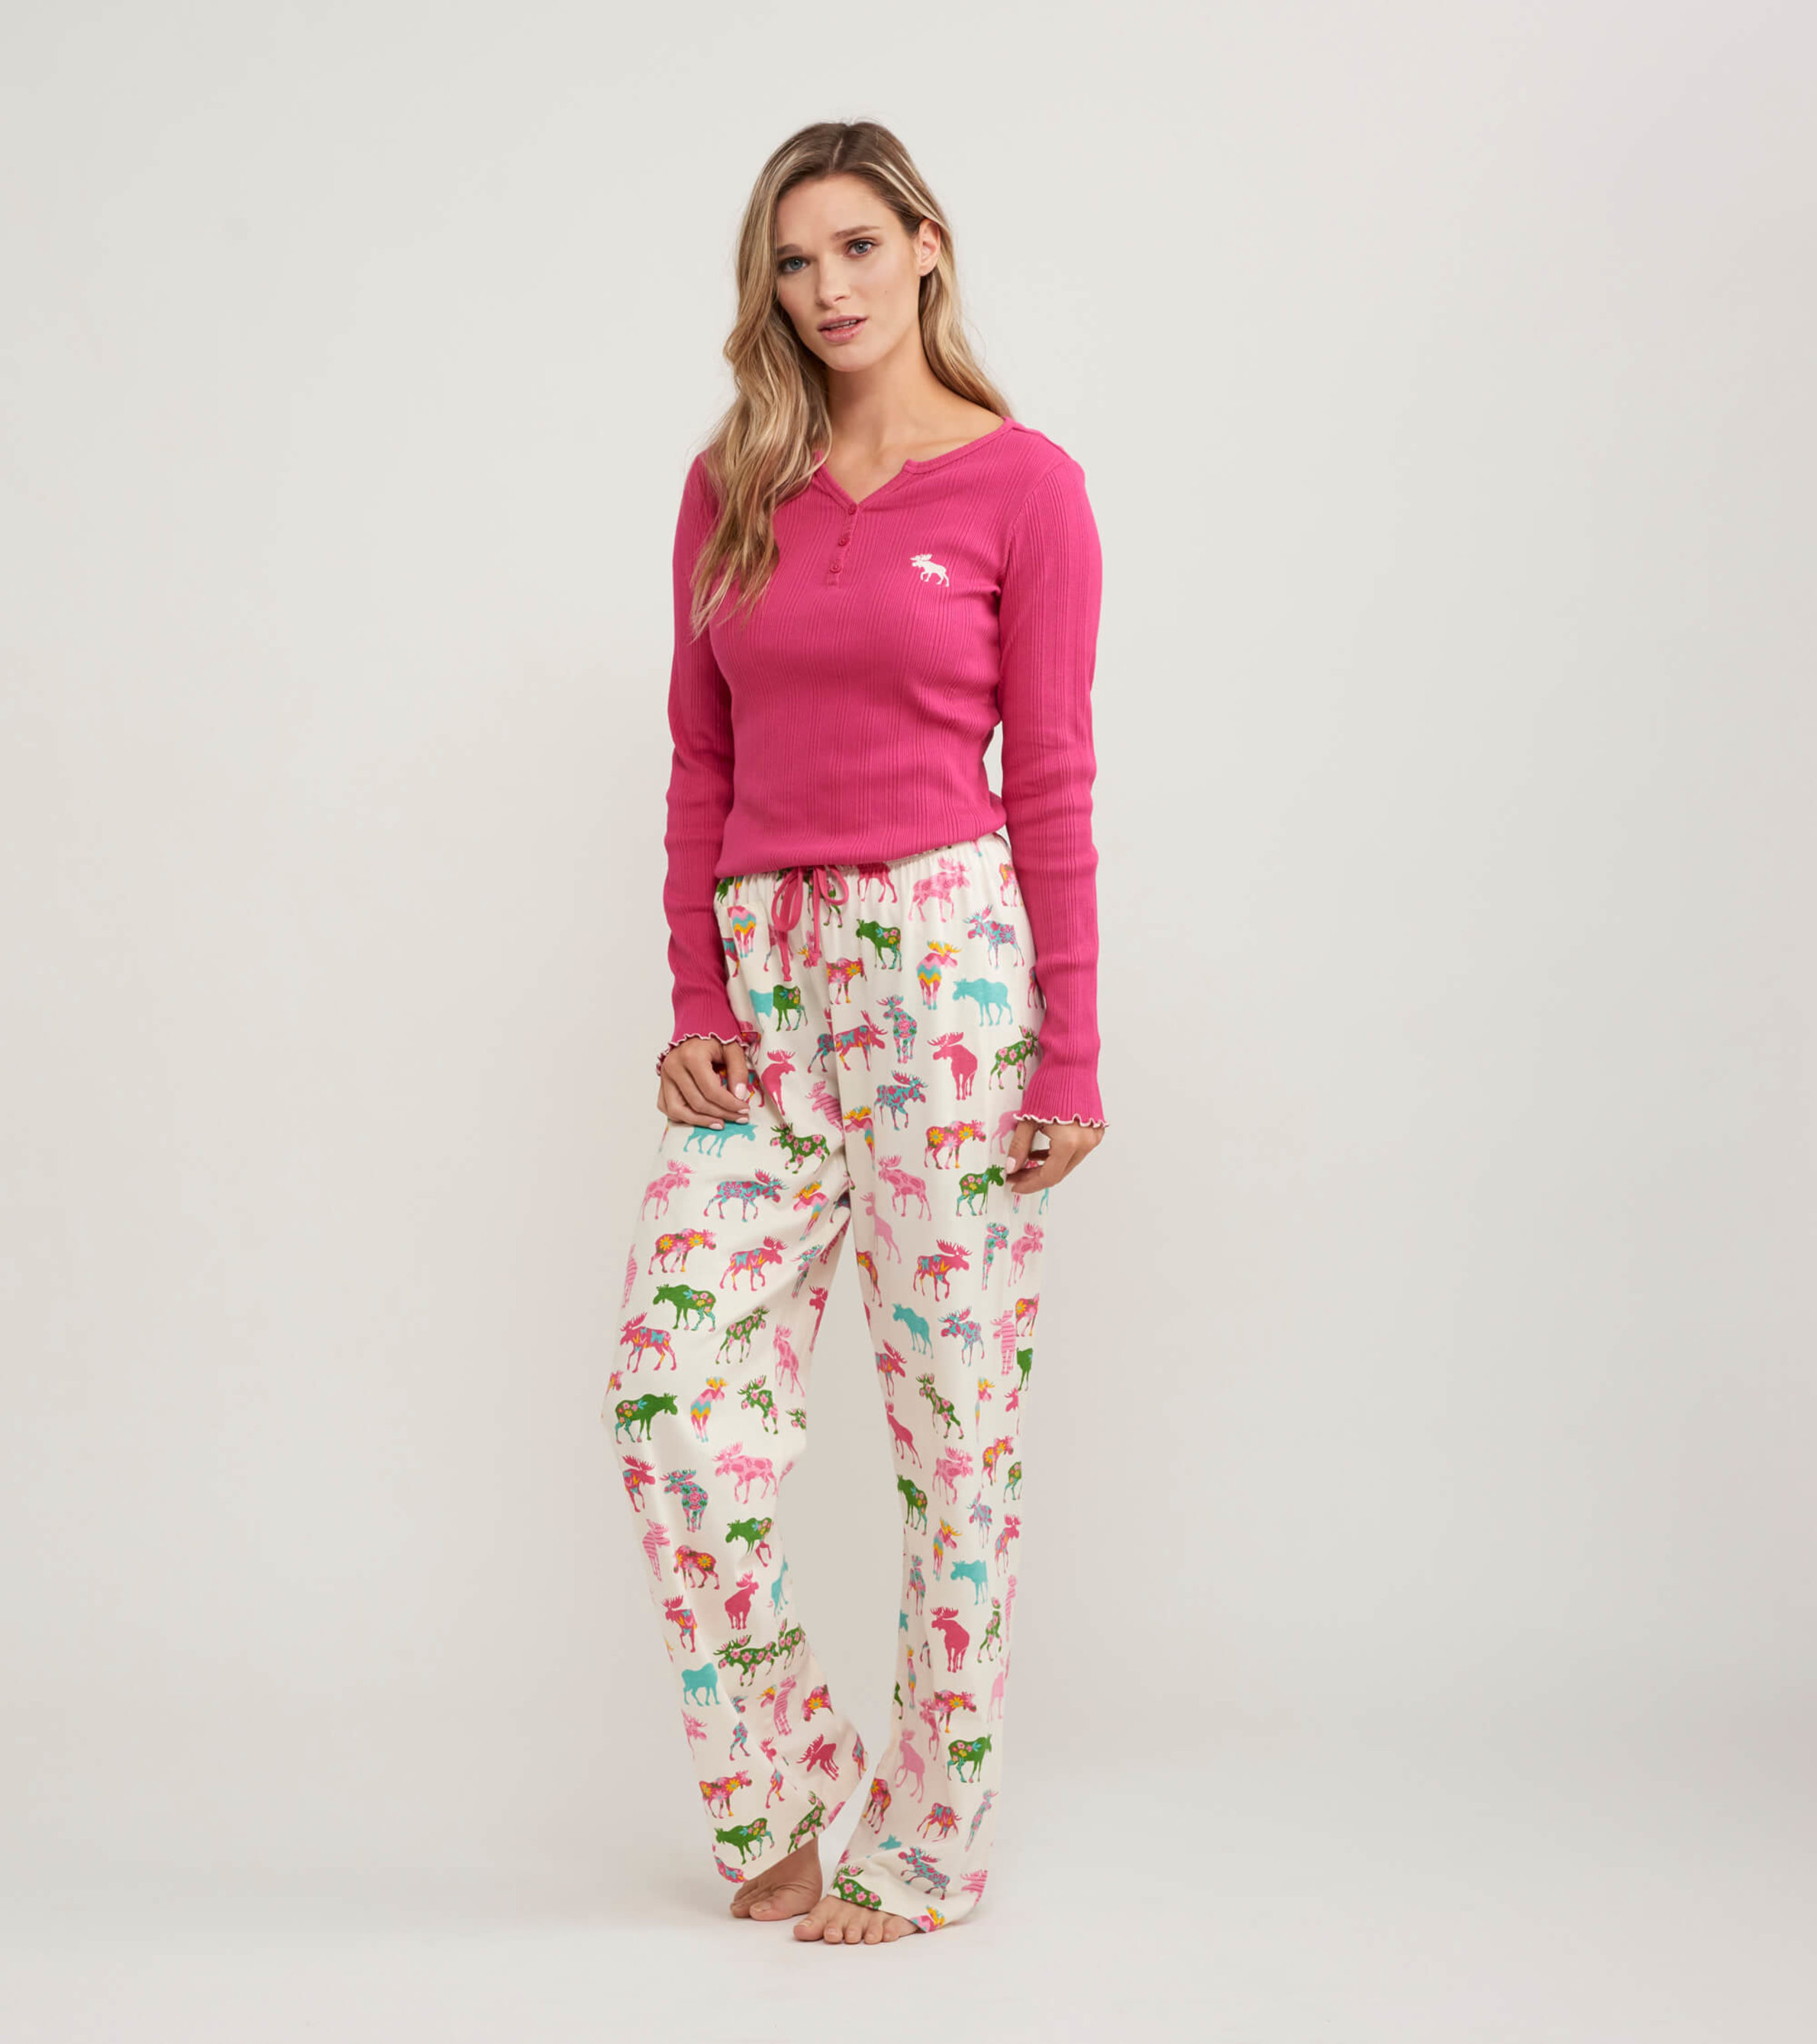 https://cdn.littlebluehouse.com/product_images/patterned-moose-womens-pajama-pants/PA2WIMO002_A_jpg/pdp_zoom.jpg?c=1603992987&locale=us_en